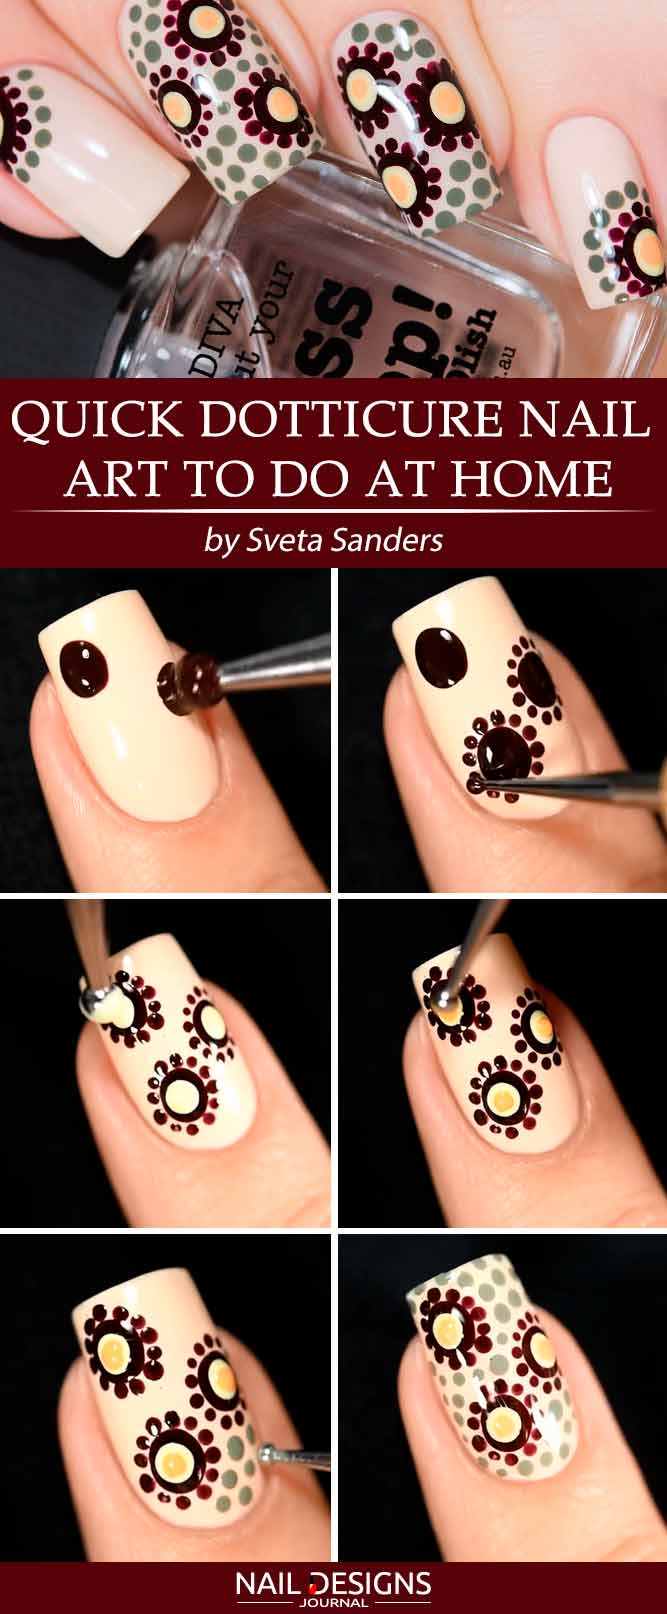 Quick Dotticure Nail Art To Do At Home